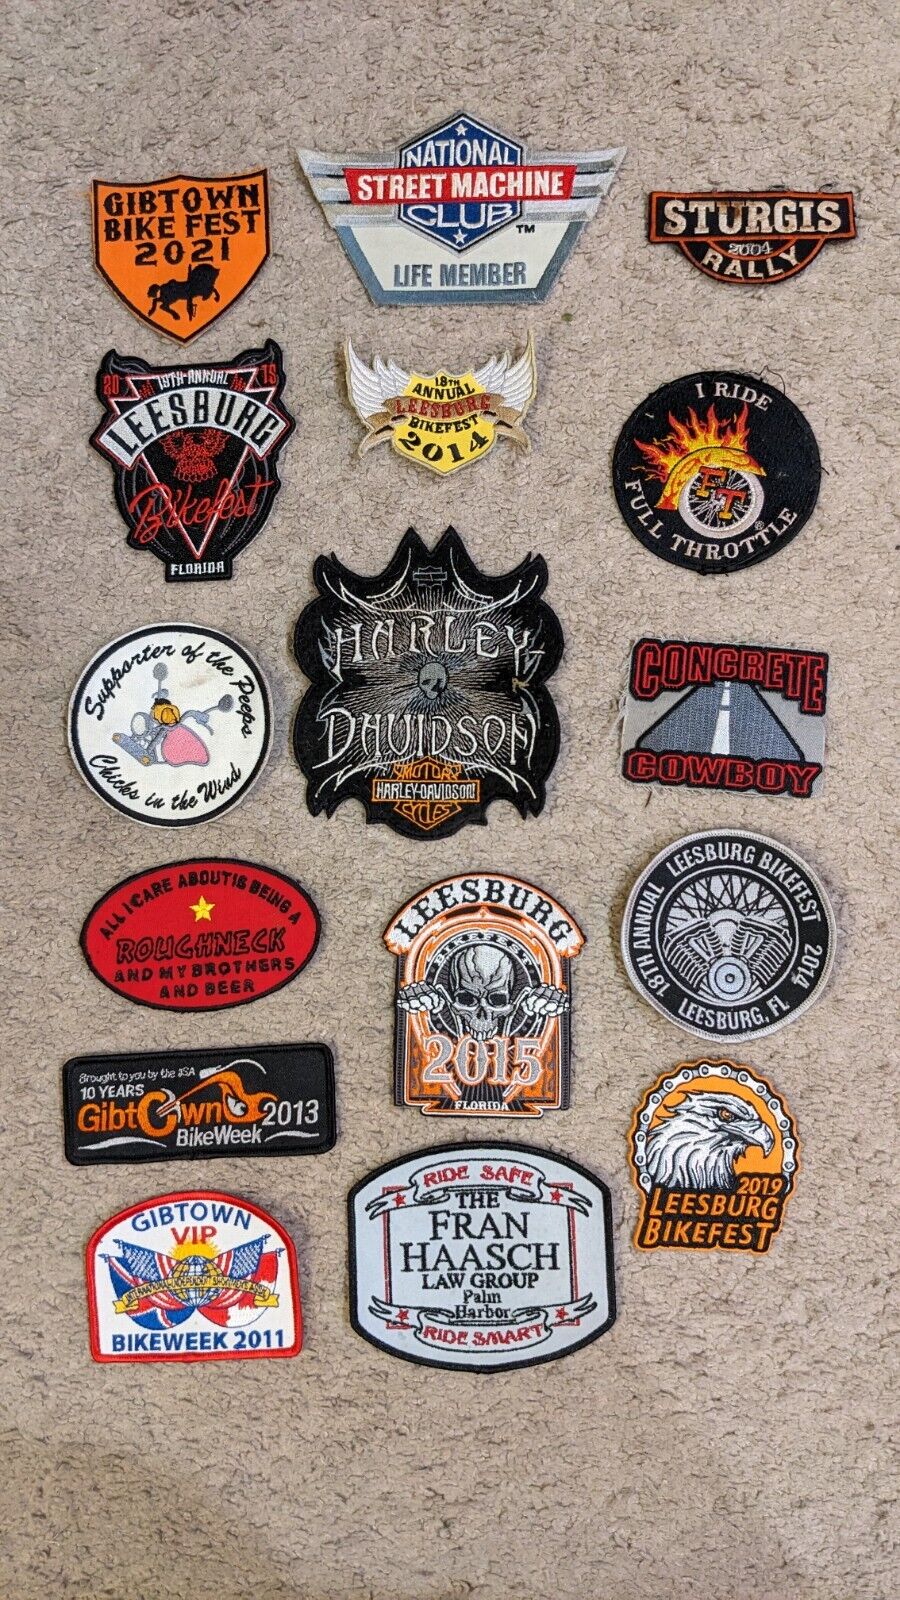 Lot of 16 Biker Motorcycle Jacket Patches Leesburg Concrete Cowboy Full Throttle